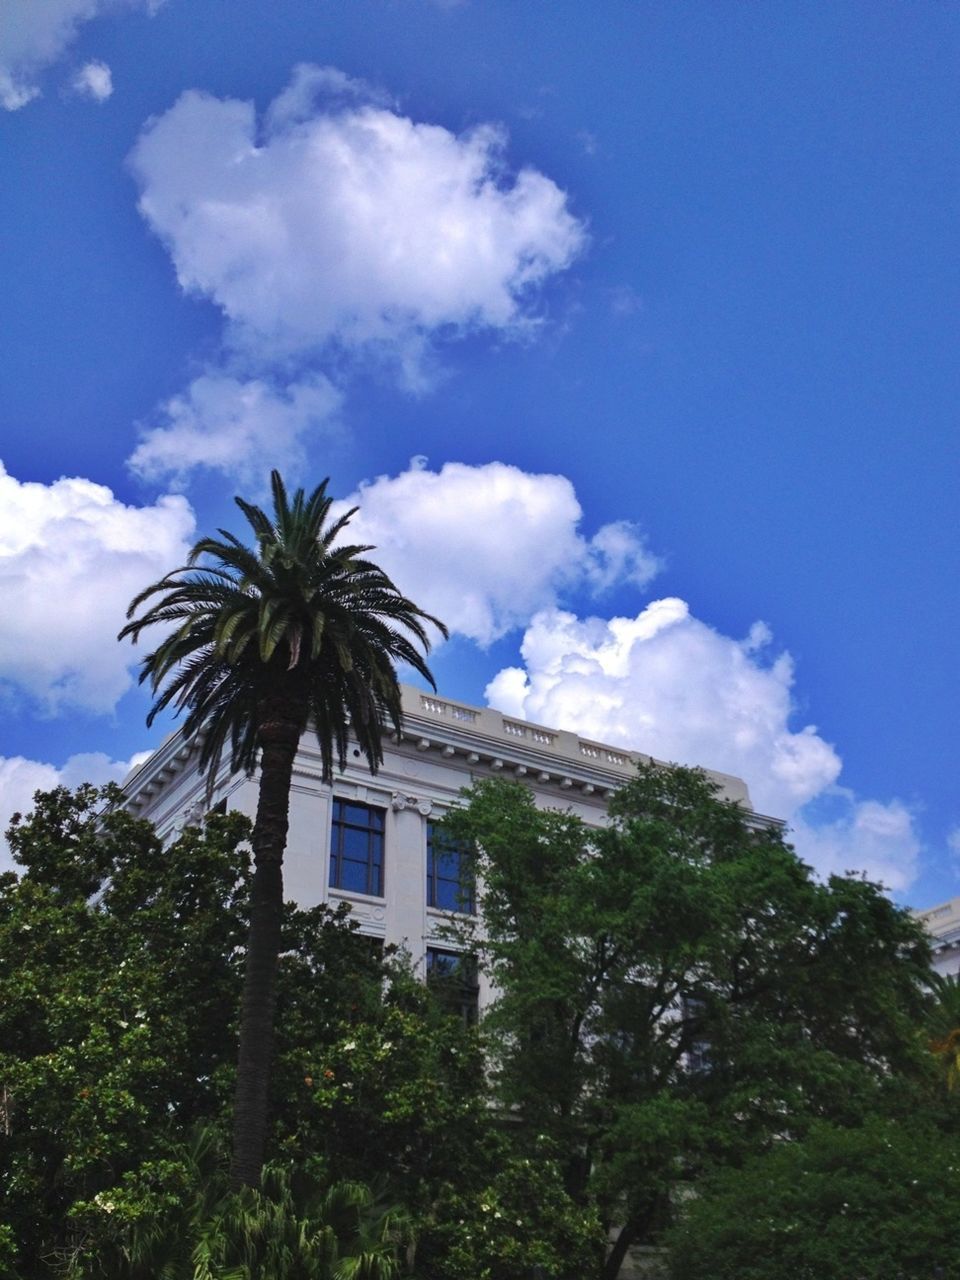 View of building exterior and trees against blue sky